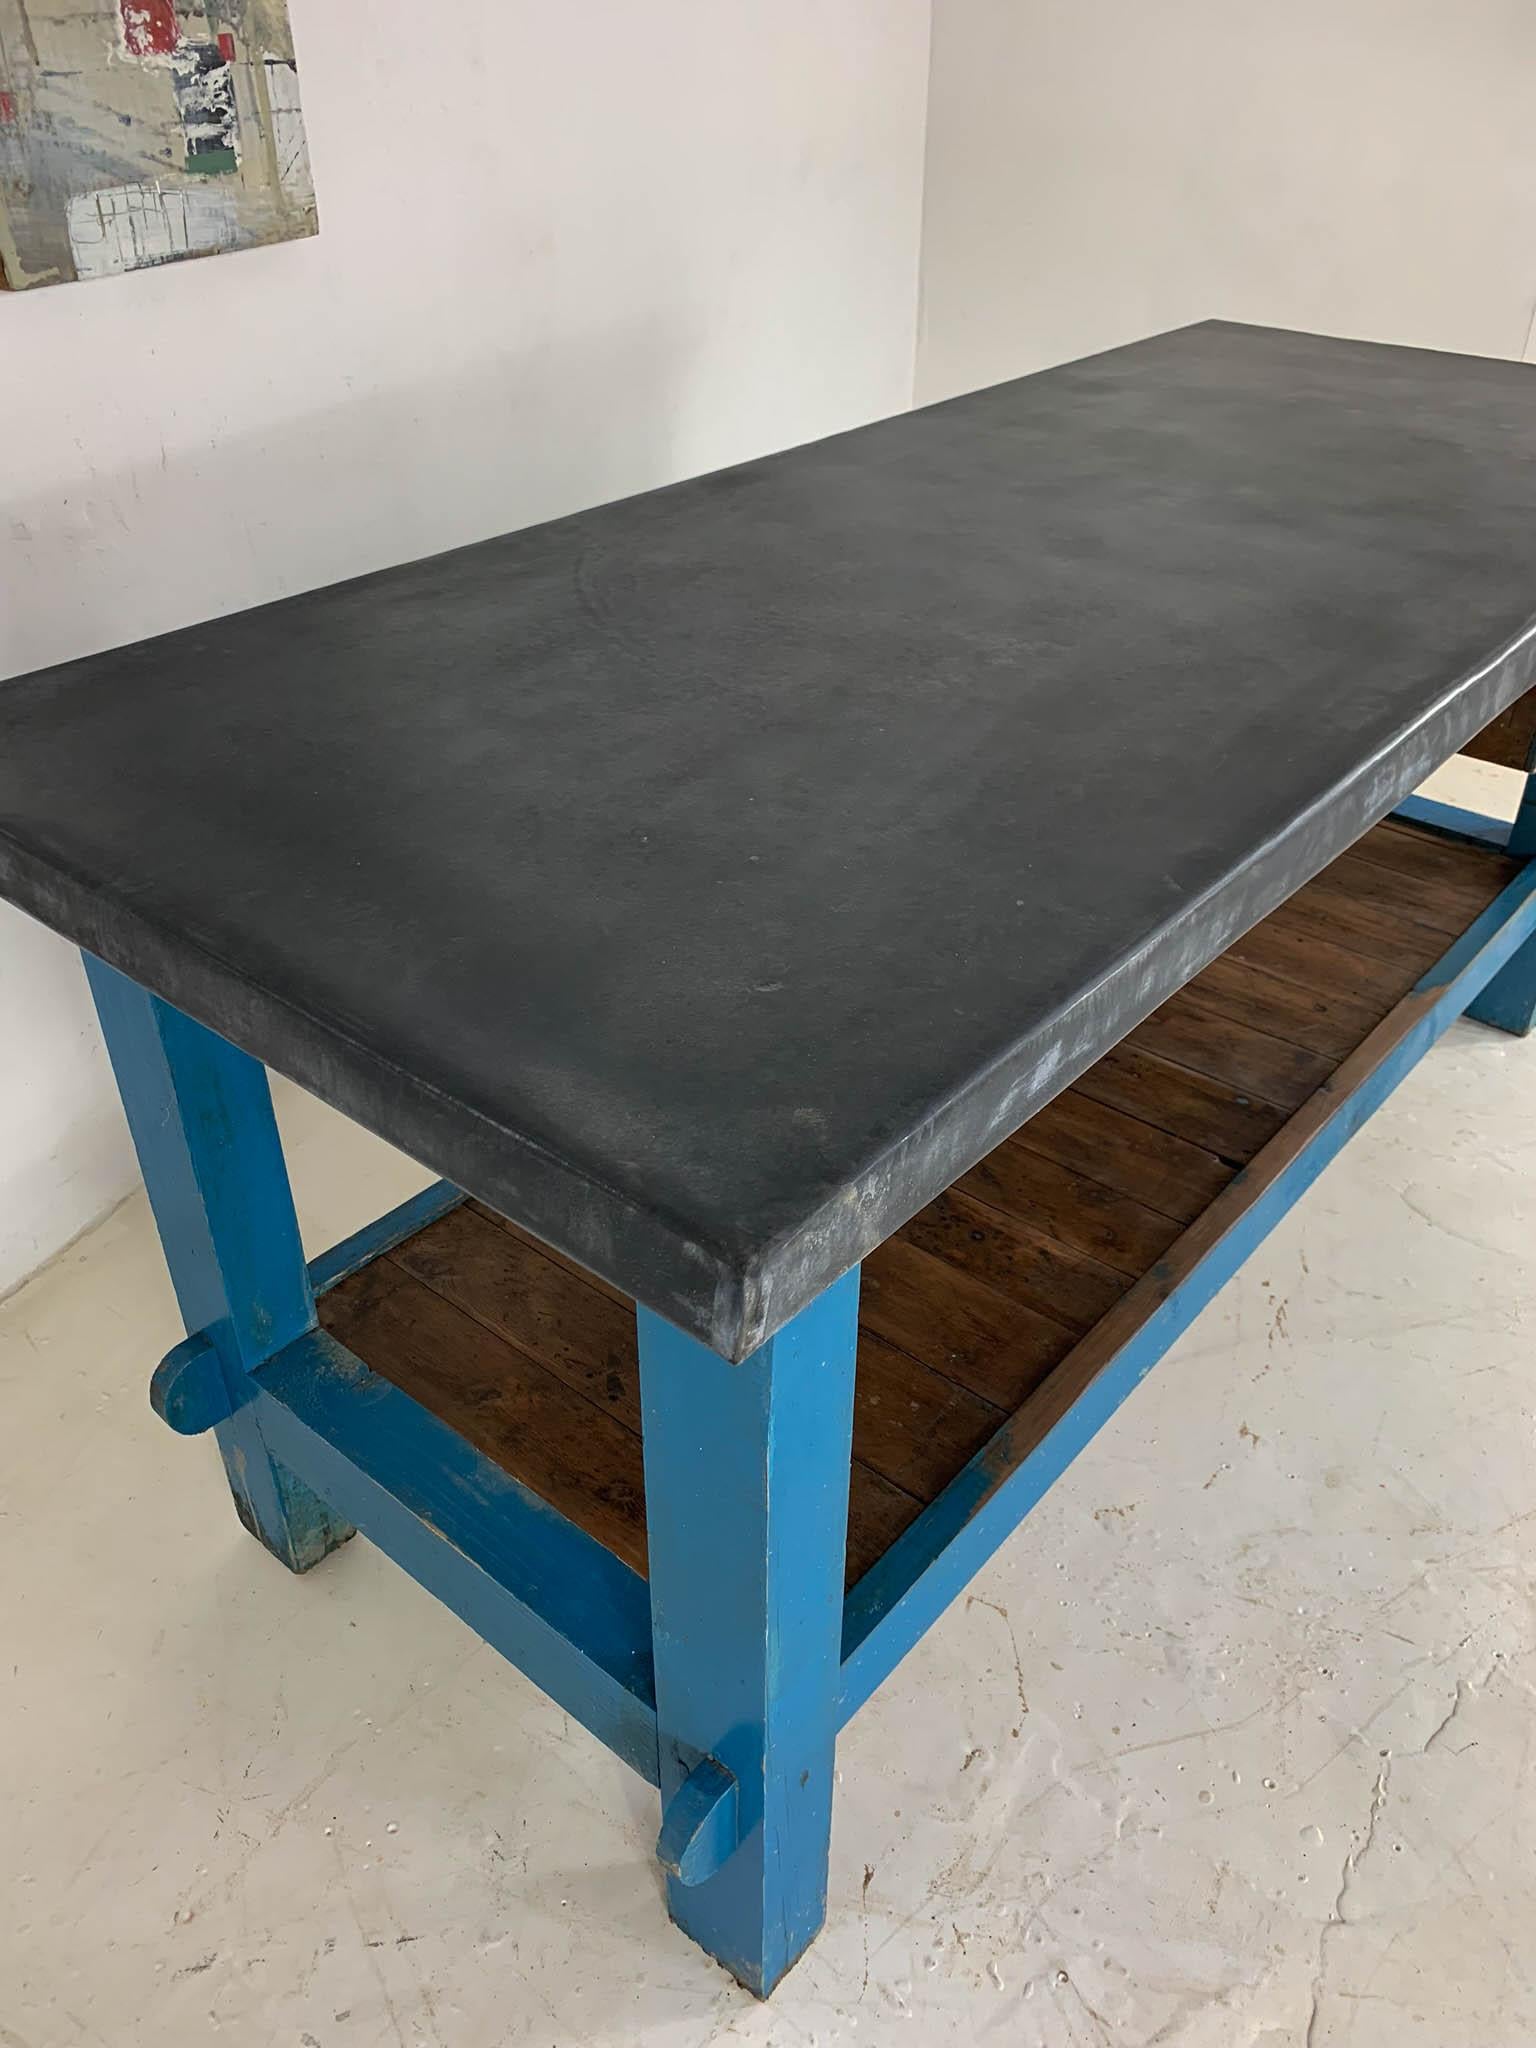 English Vintage Industrial Painted Pine 'Potting Board' Table Workbench with Zinc Top